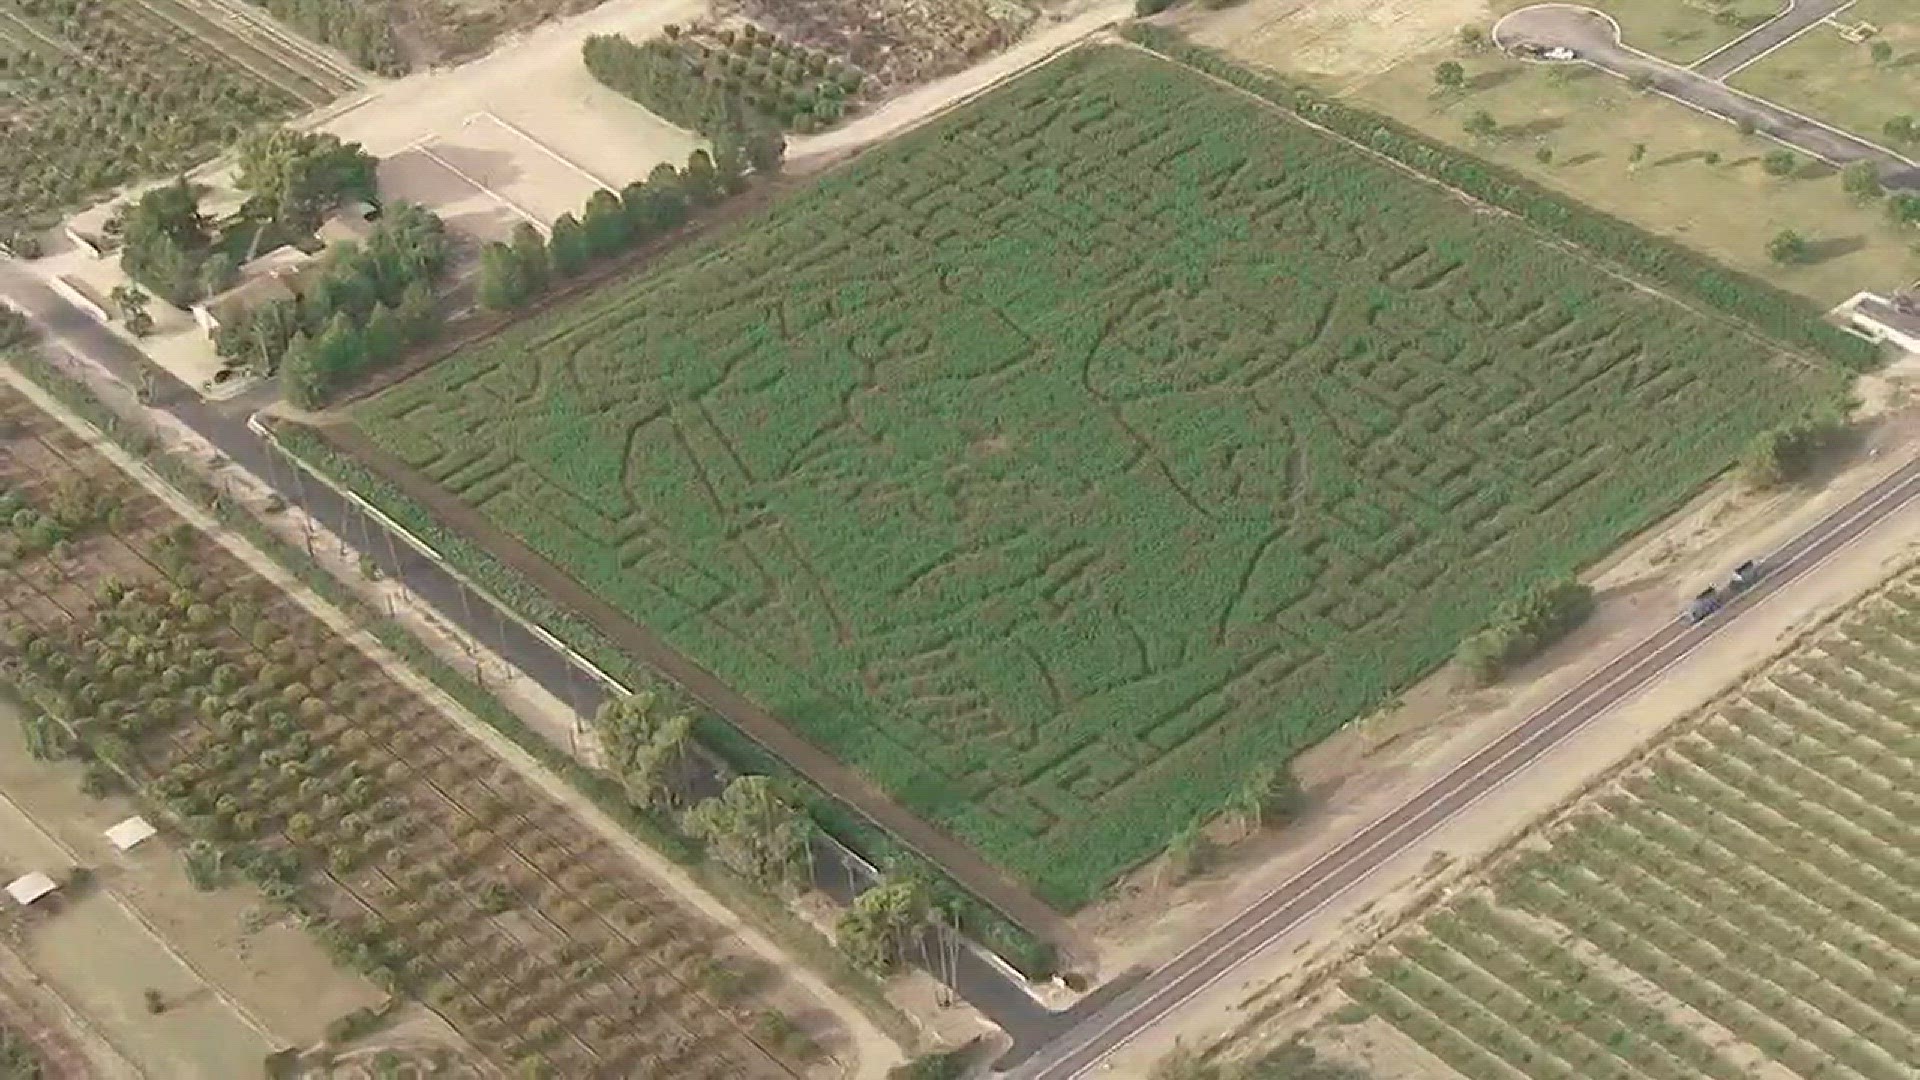 Shane Doan thought he was on his way to a round of golf but he found his image carved into a corn maze at Schnepf Farms.